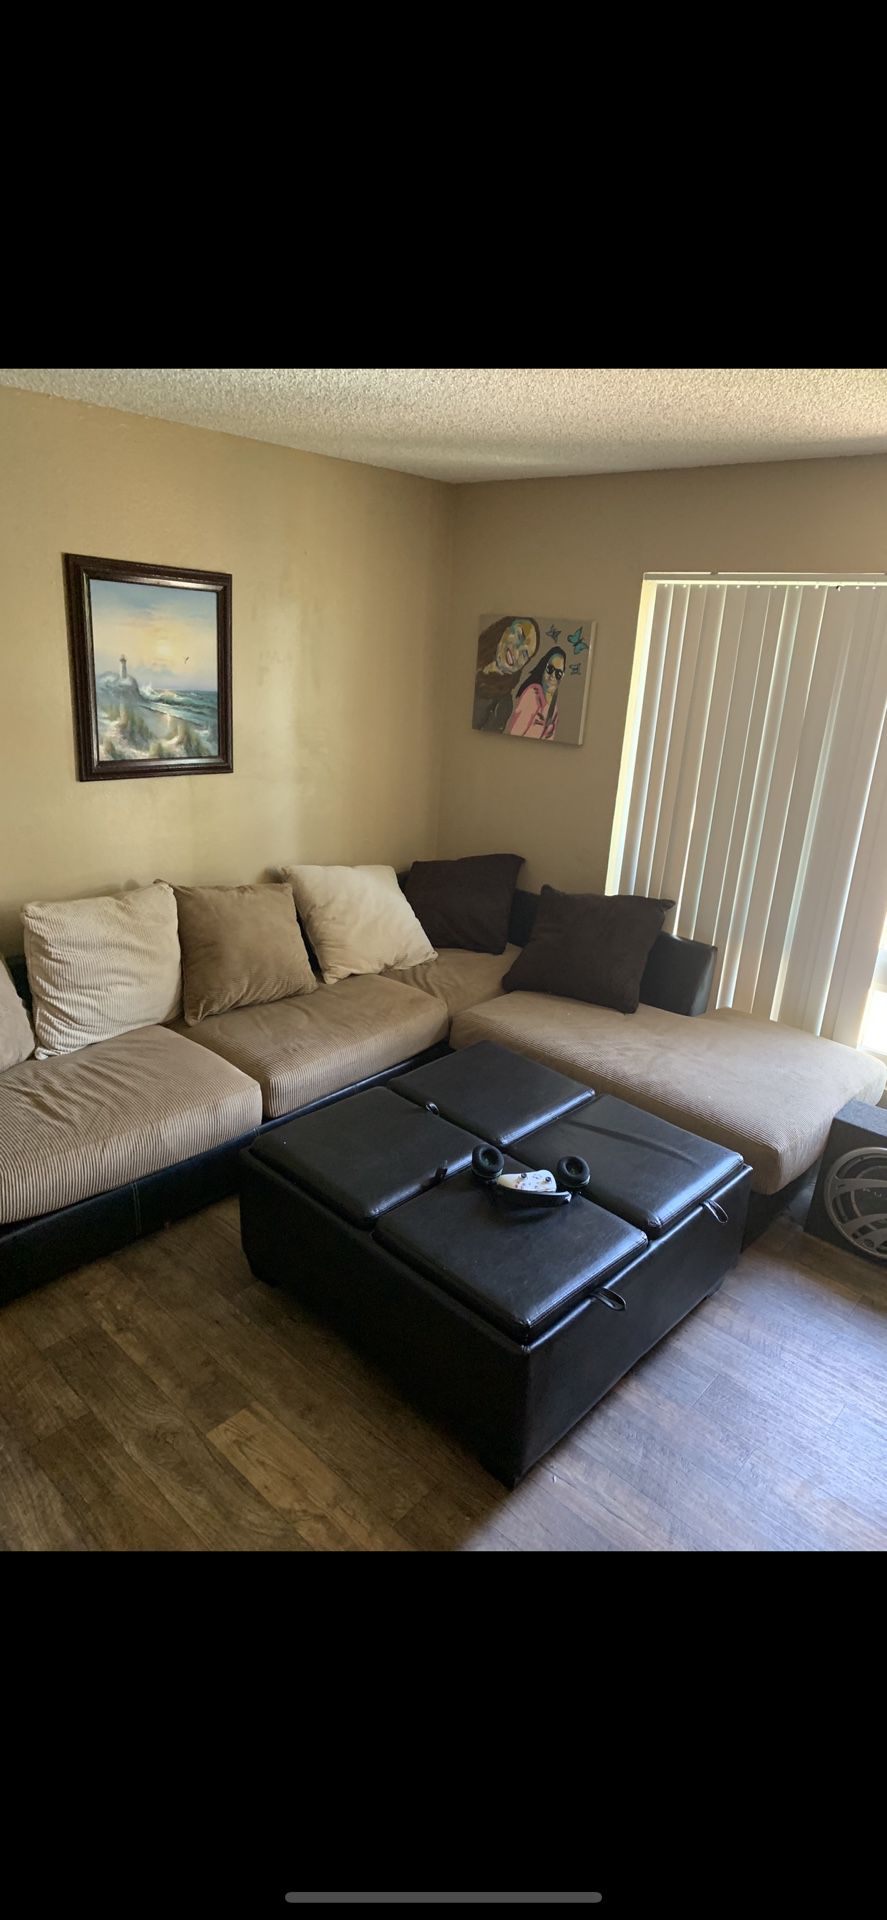 Brand new couches